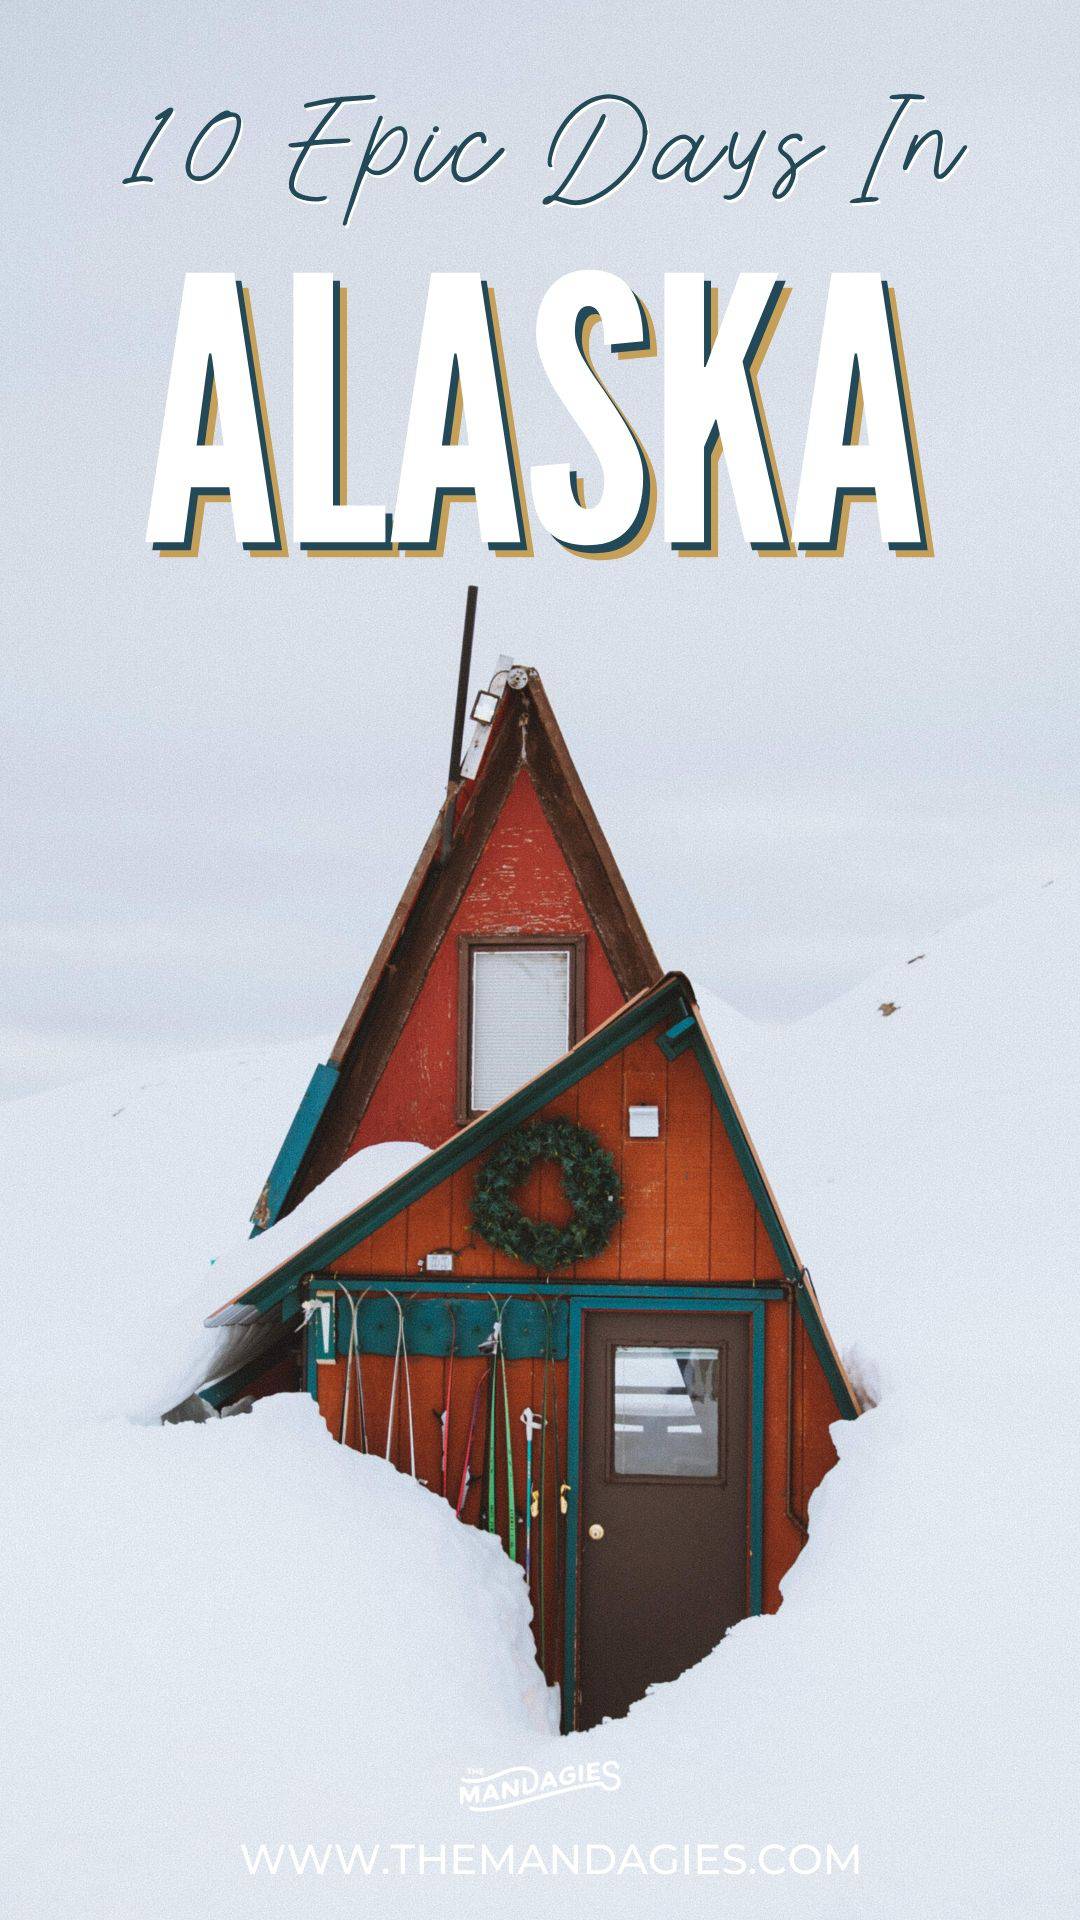 Explore the last frontier with the ultimate 10-day Alaska road trip! We're sharing all the best stops, from Fairbanks, Denali National Park, Kenai Fjords, Seward, and Anchorage. Save this post for a future trip to Alaska! #alaska #roadtrip #PNW #pacificnorthwest #anchorage #fairbanks #denali #photography #vwwestfalia